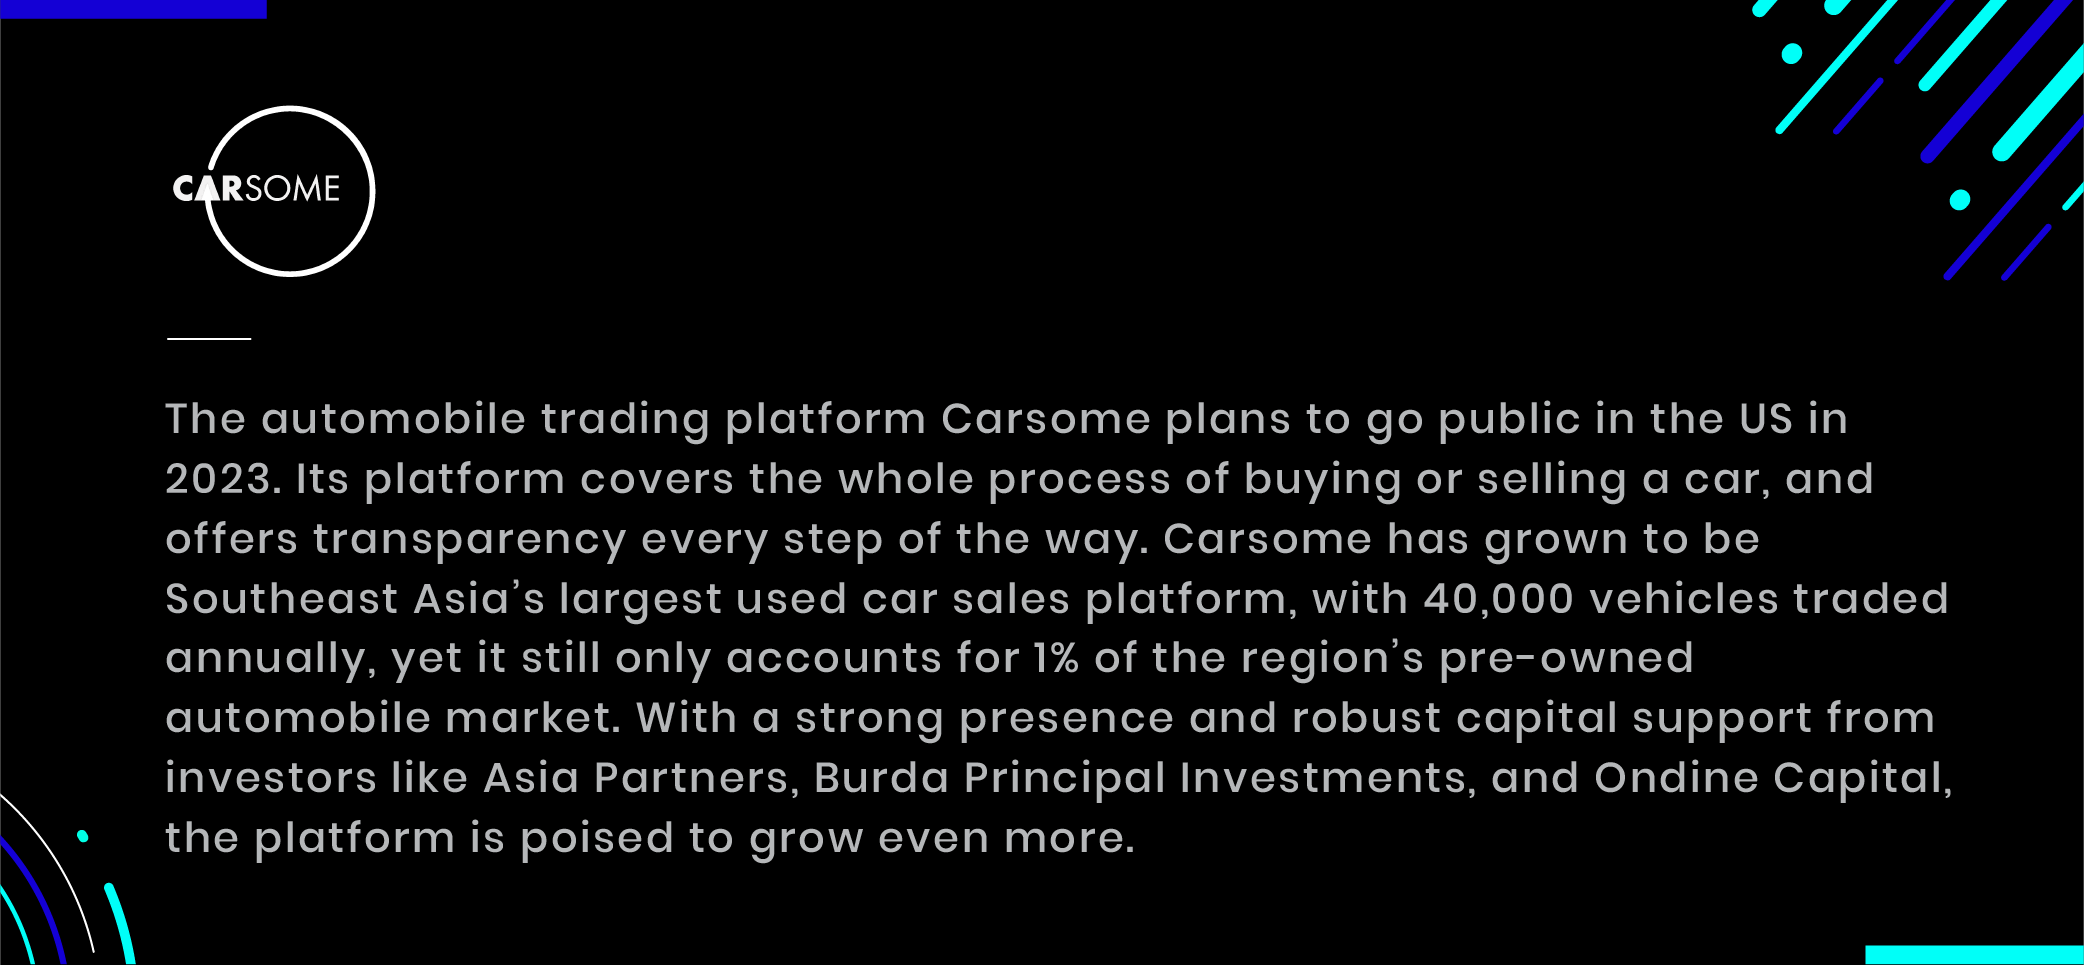 Carsome automobile trading platform largest used car sales southeast asia partners burda capital investments ondine capital